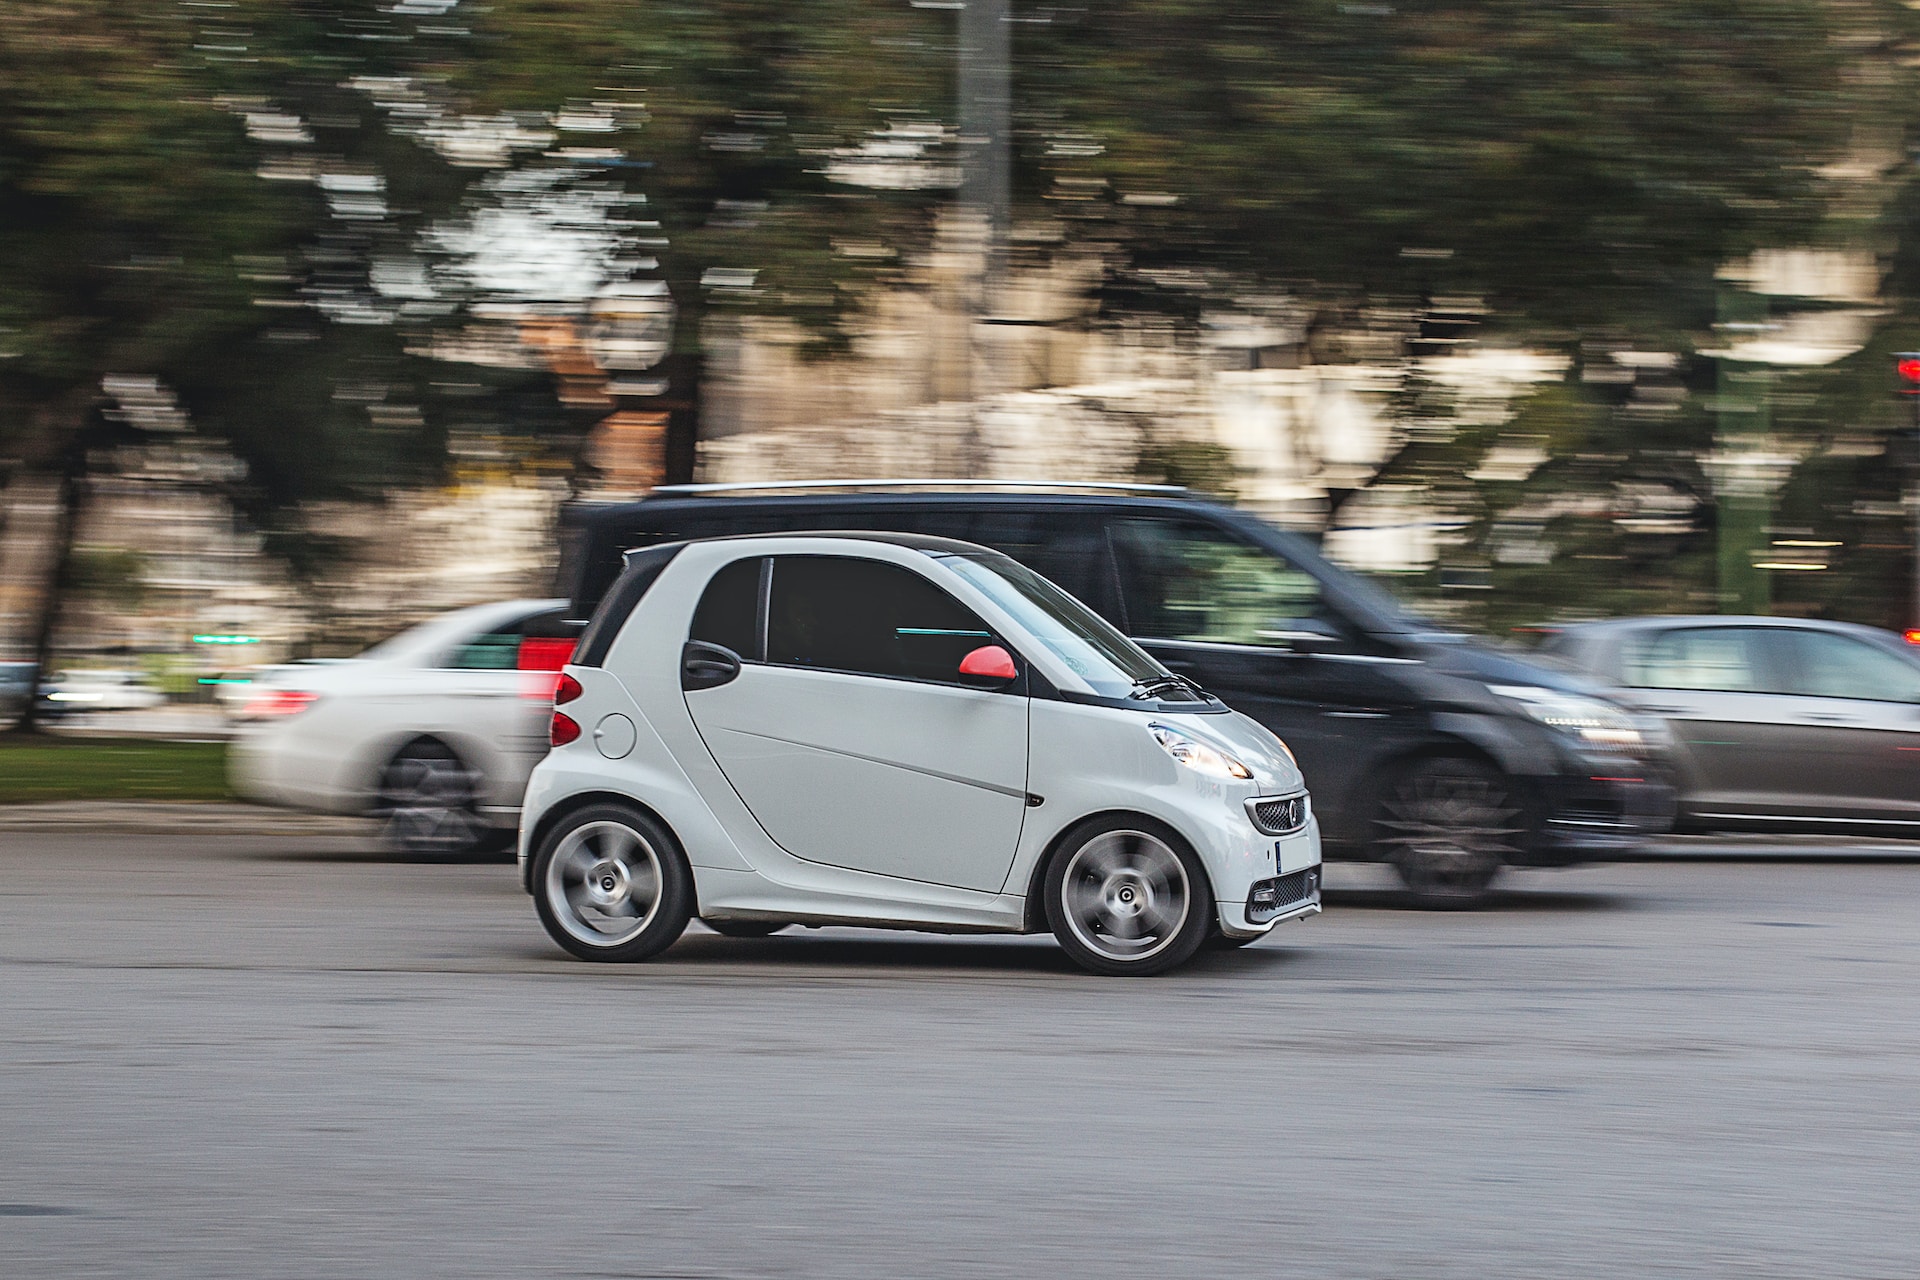 Are Smart Cars Safe and Economical or Just Small?